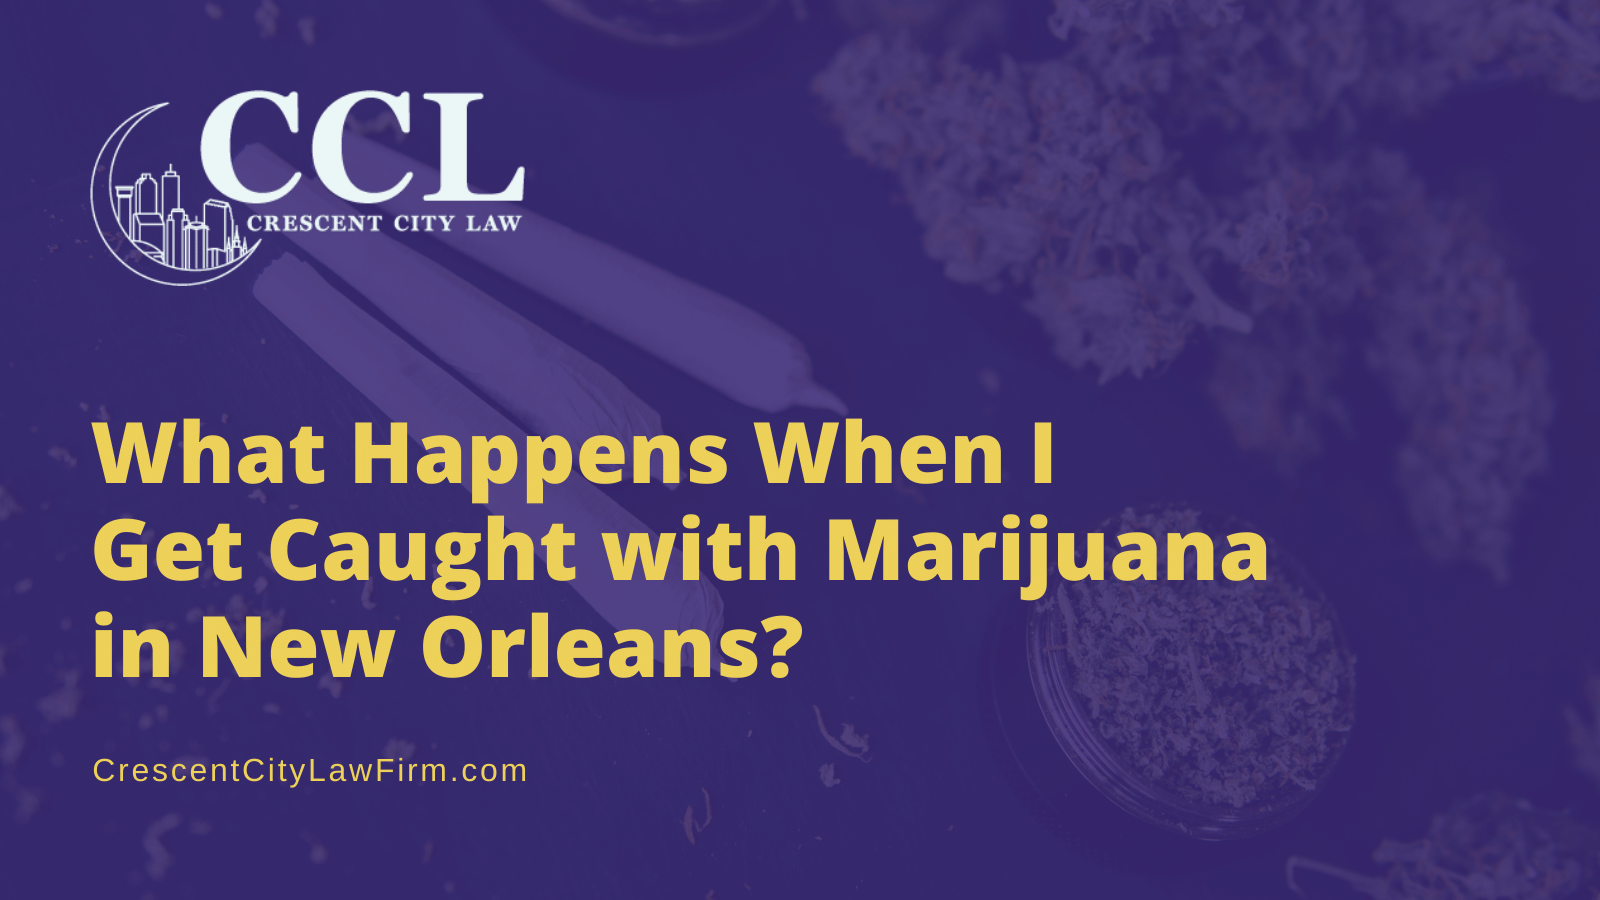 What Happens When I Get Caught with Marijuana in New Orleans - crescent city law firm - new orleans la